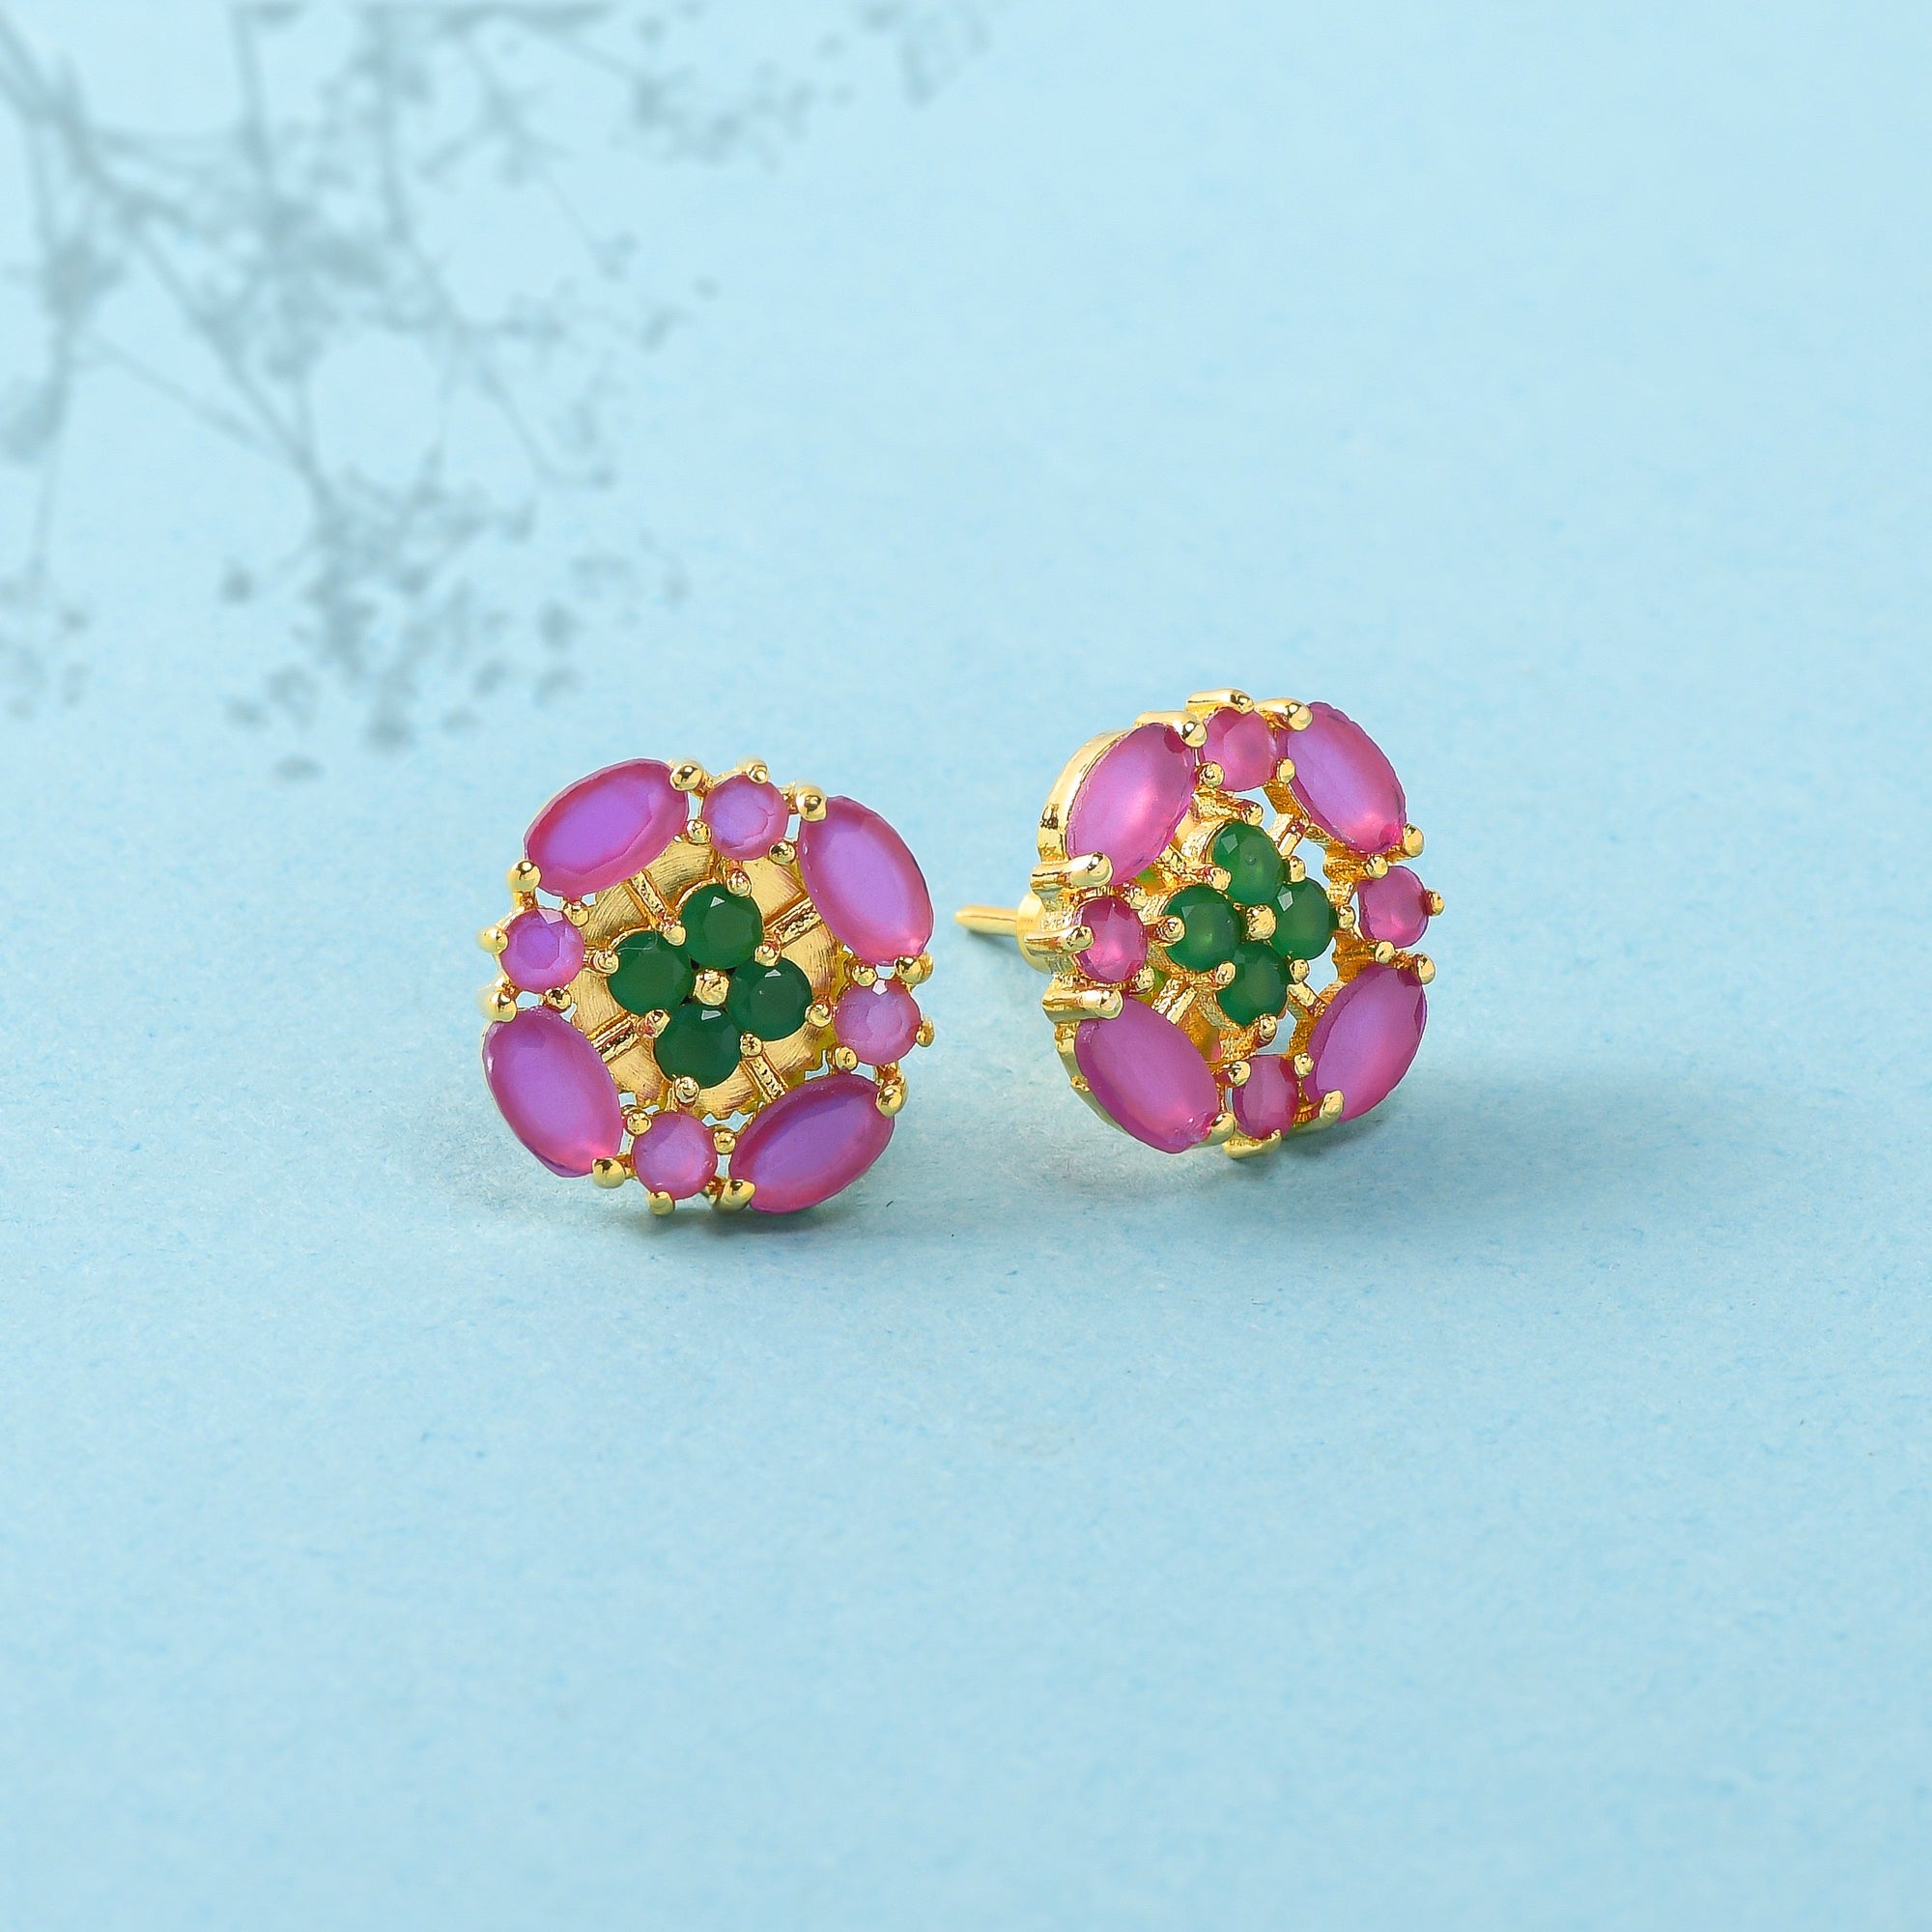 Women's Pink And Green Cluster Setting Cz Stud Earrings - Voylla